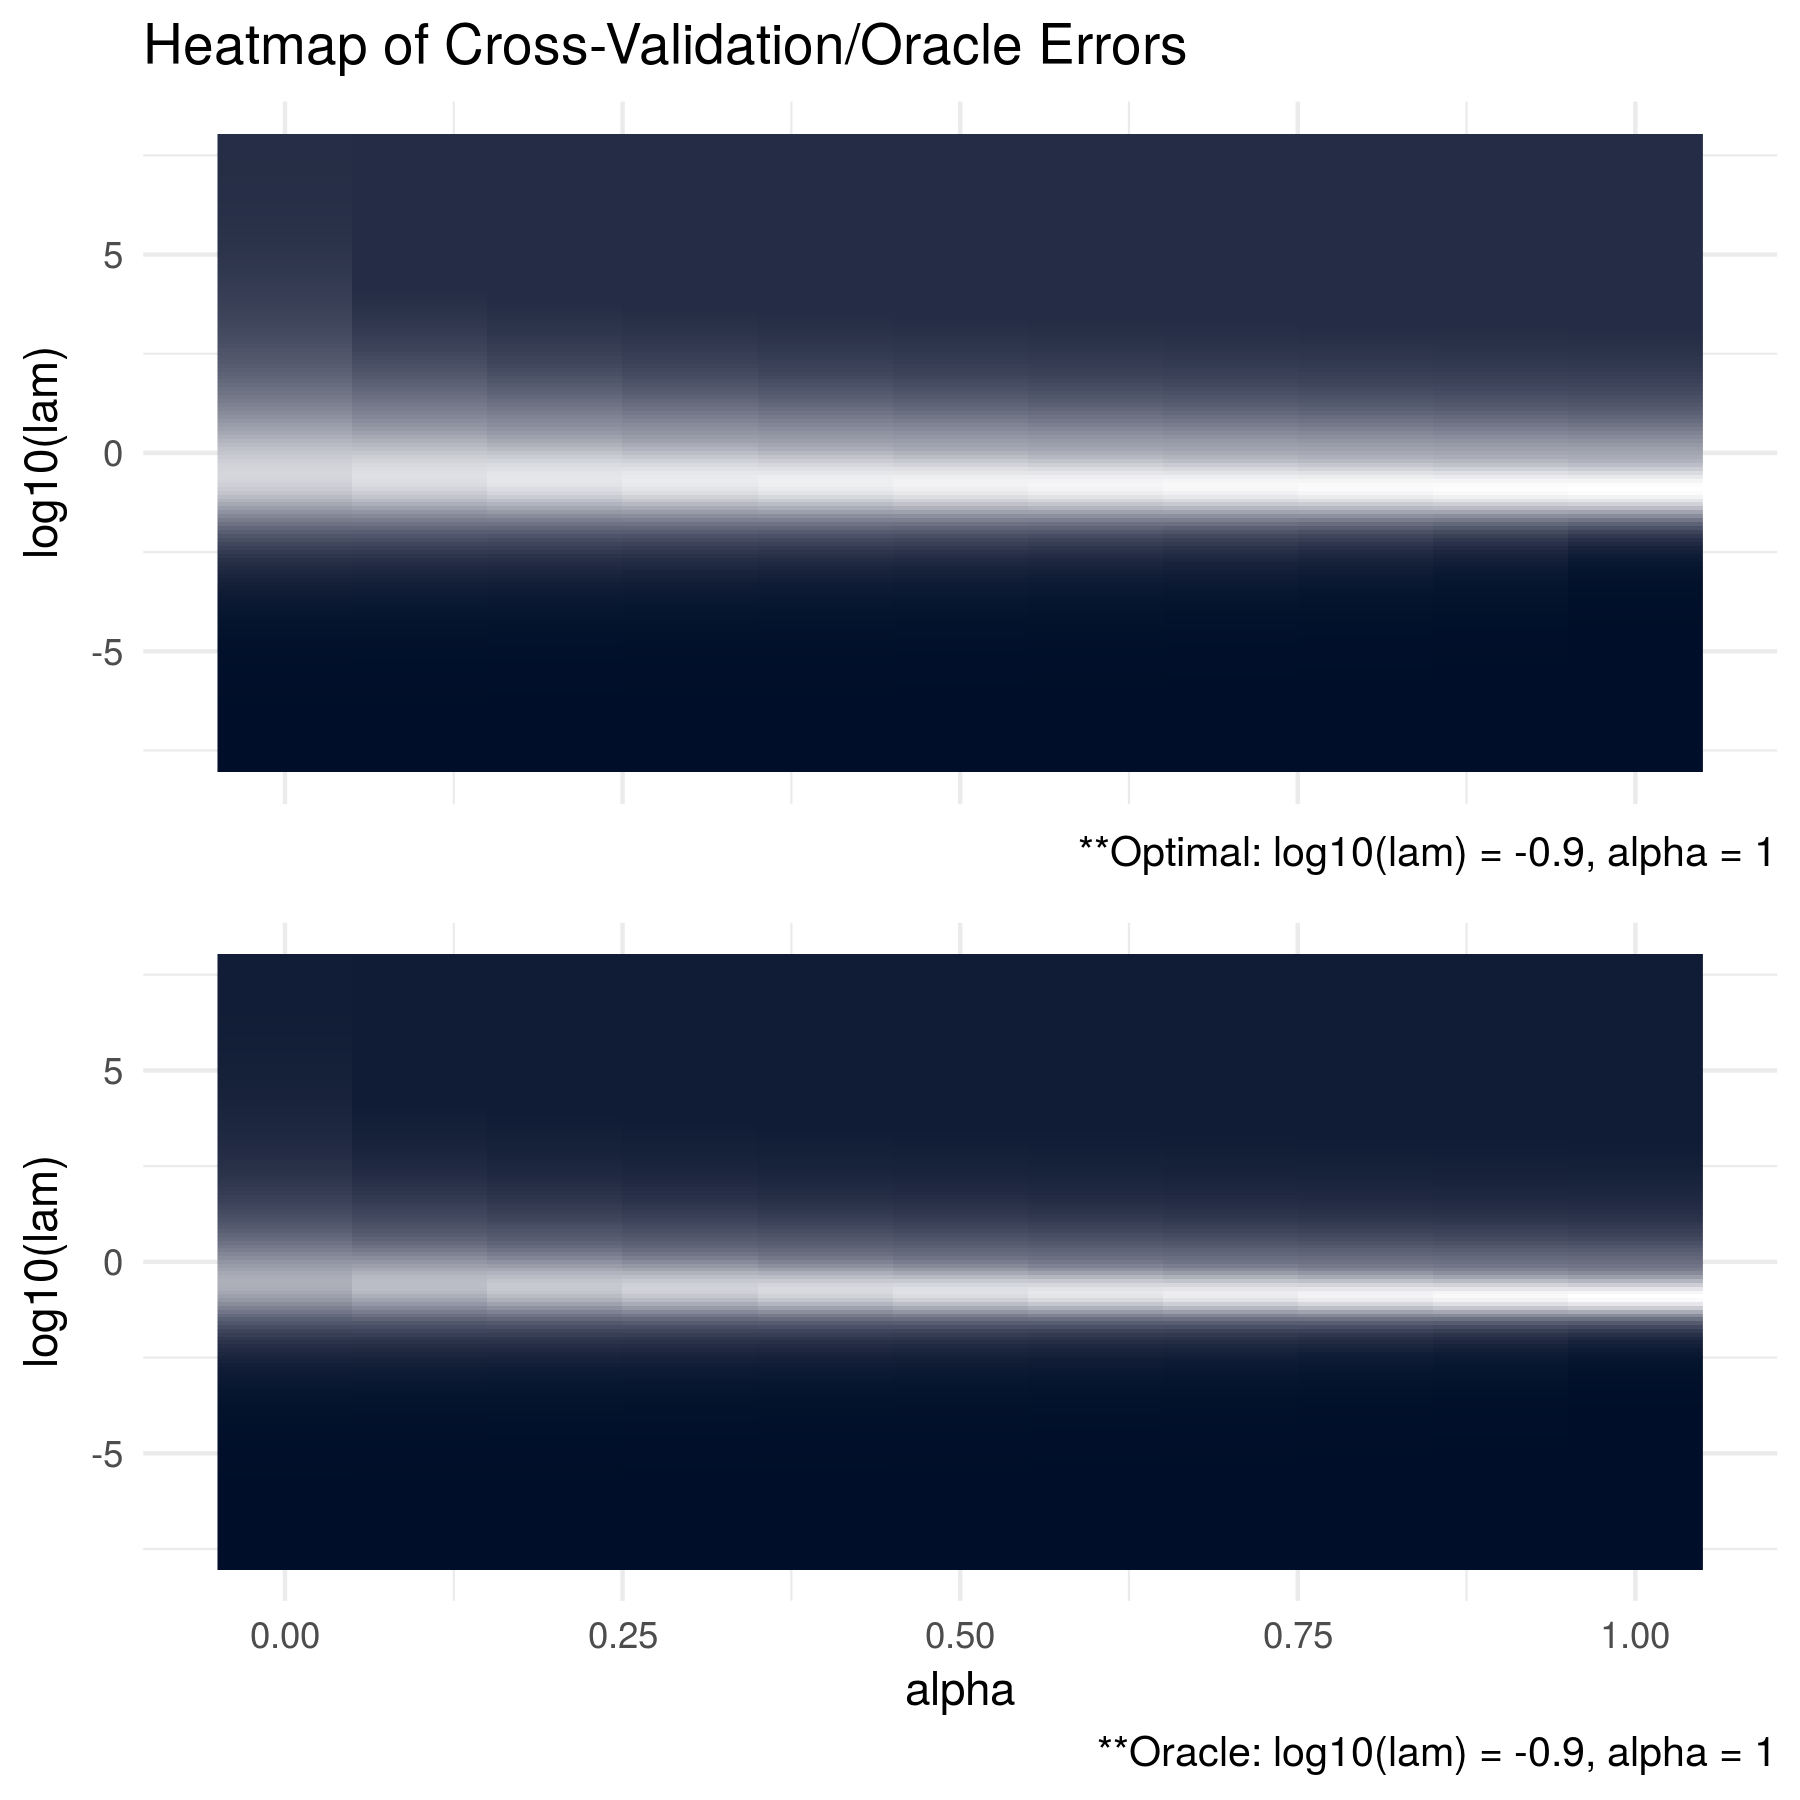 The oracle precision matrices were tri-diagonal with dimension p = 100 and the data was generated with a sample size of n = 50. The cross validation errors are in the top figure and the KL losses between the estimated matrices and the oracle matrices are shown in the bottom figure. The optimal tuning parameter pair for each heatmap was found to be log10(lam) = -0.9 and alpha = 1. Note that brighter areas signify smaller losses.